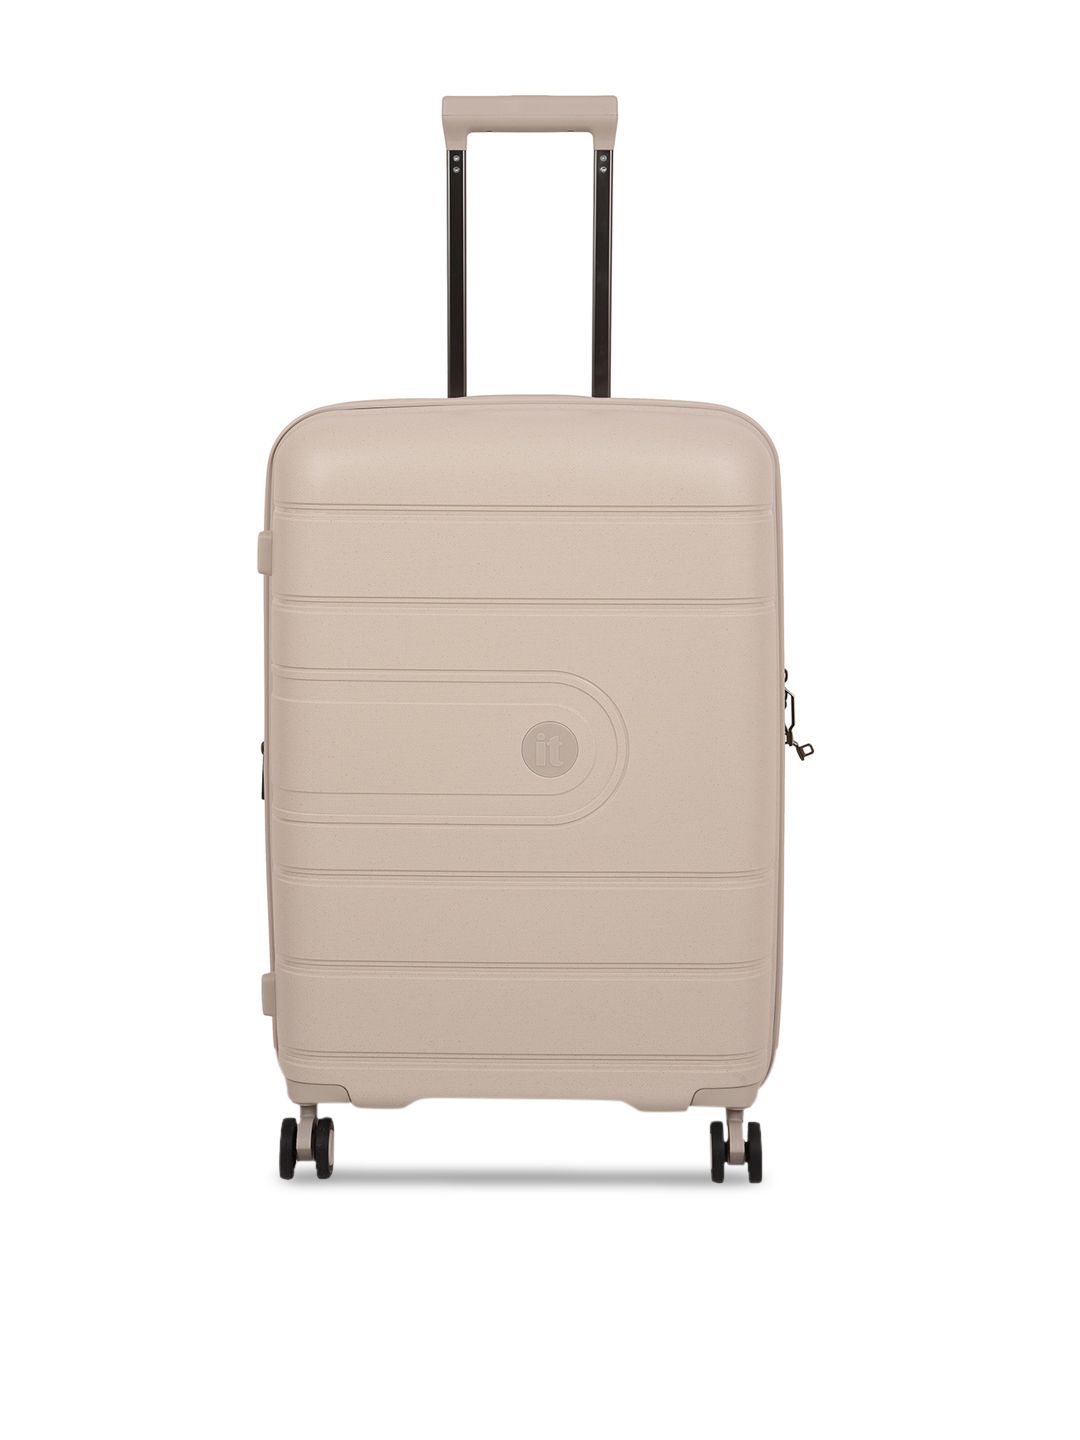 IT luggage Beige Colored Textured Trolley Suitcase Price in India